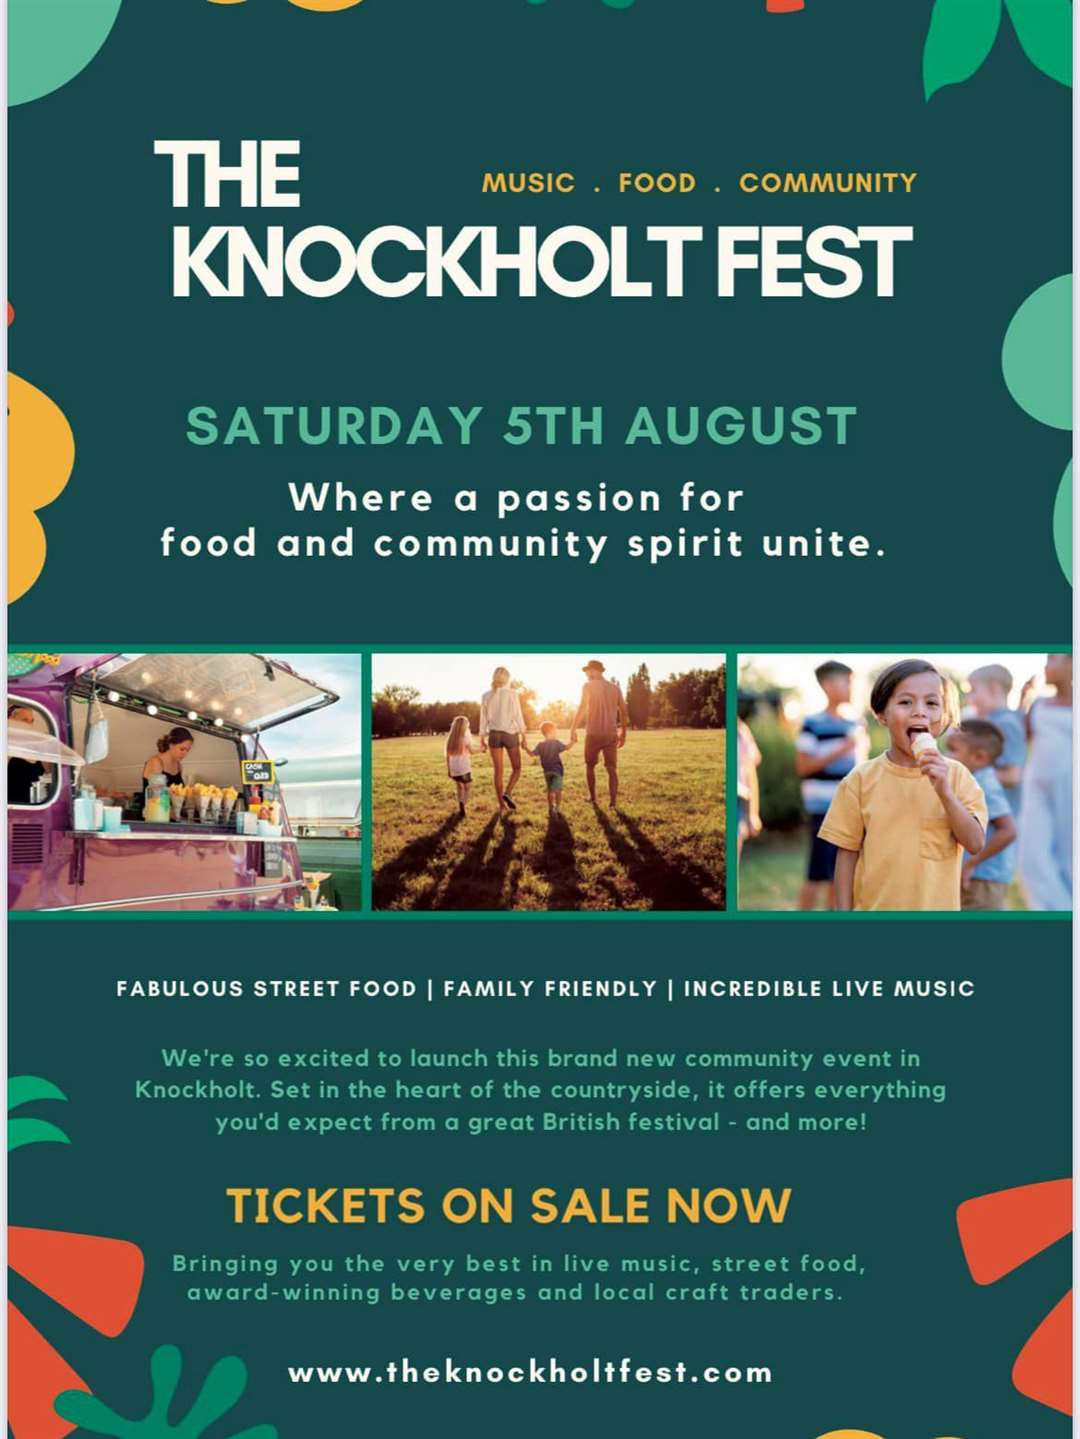 A poster advertising Knockholt Festival which has concerned some residents